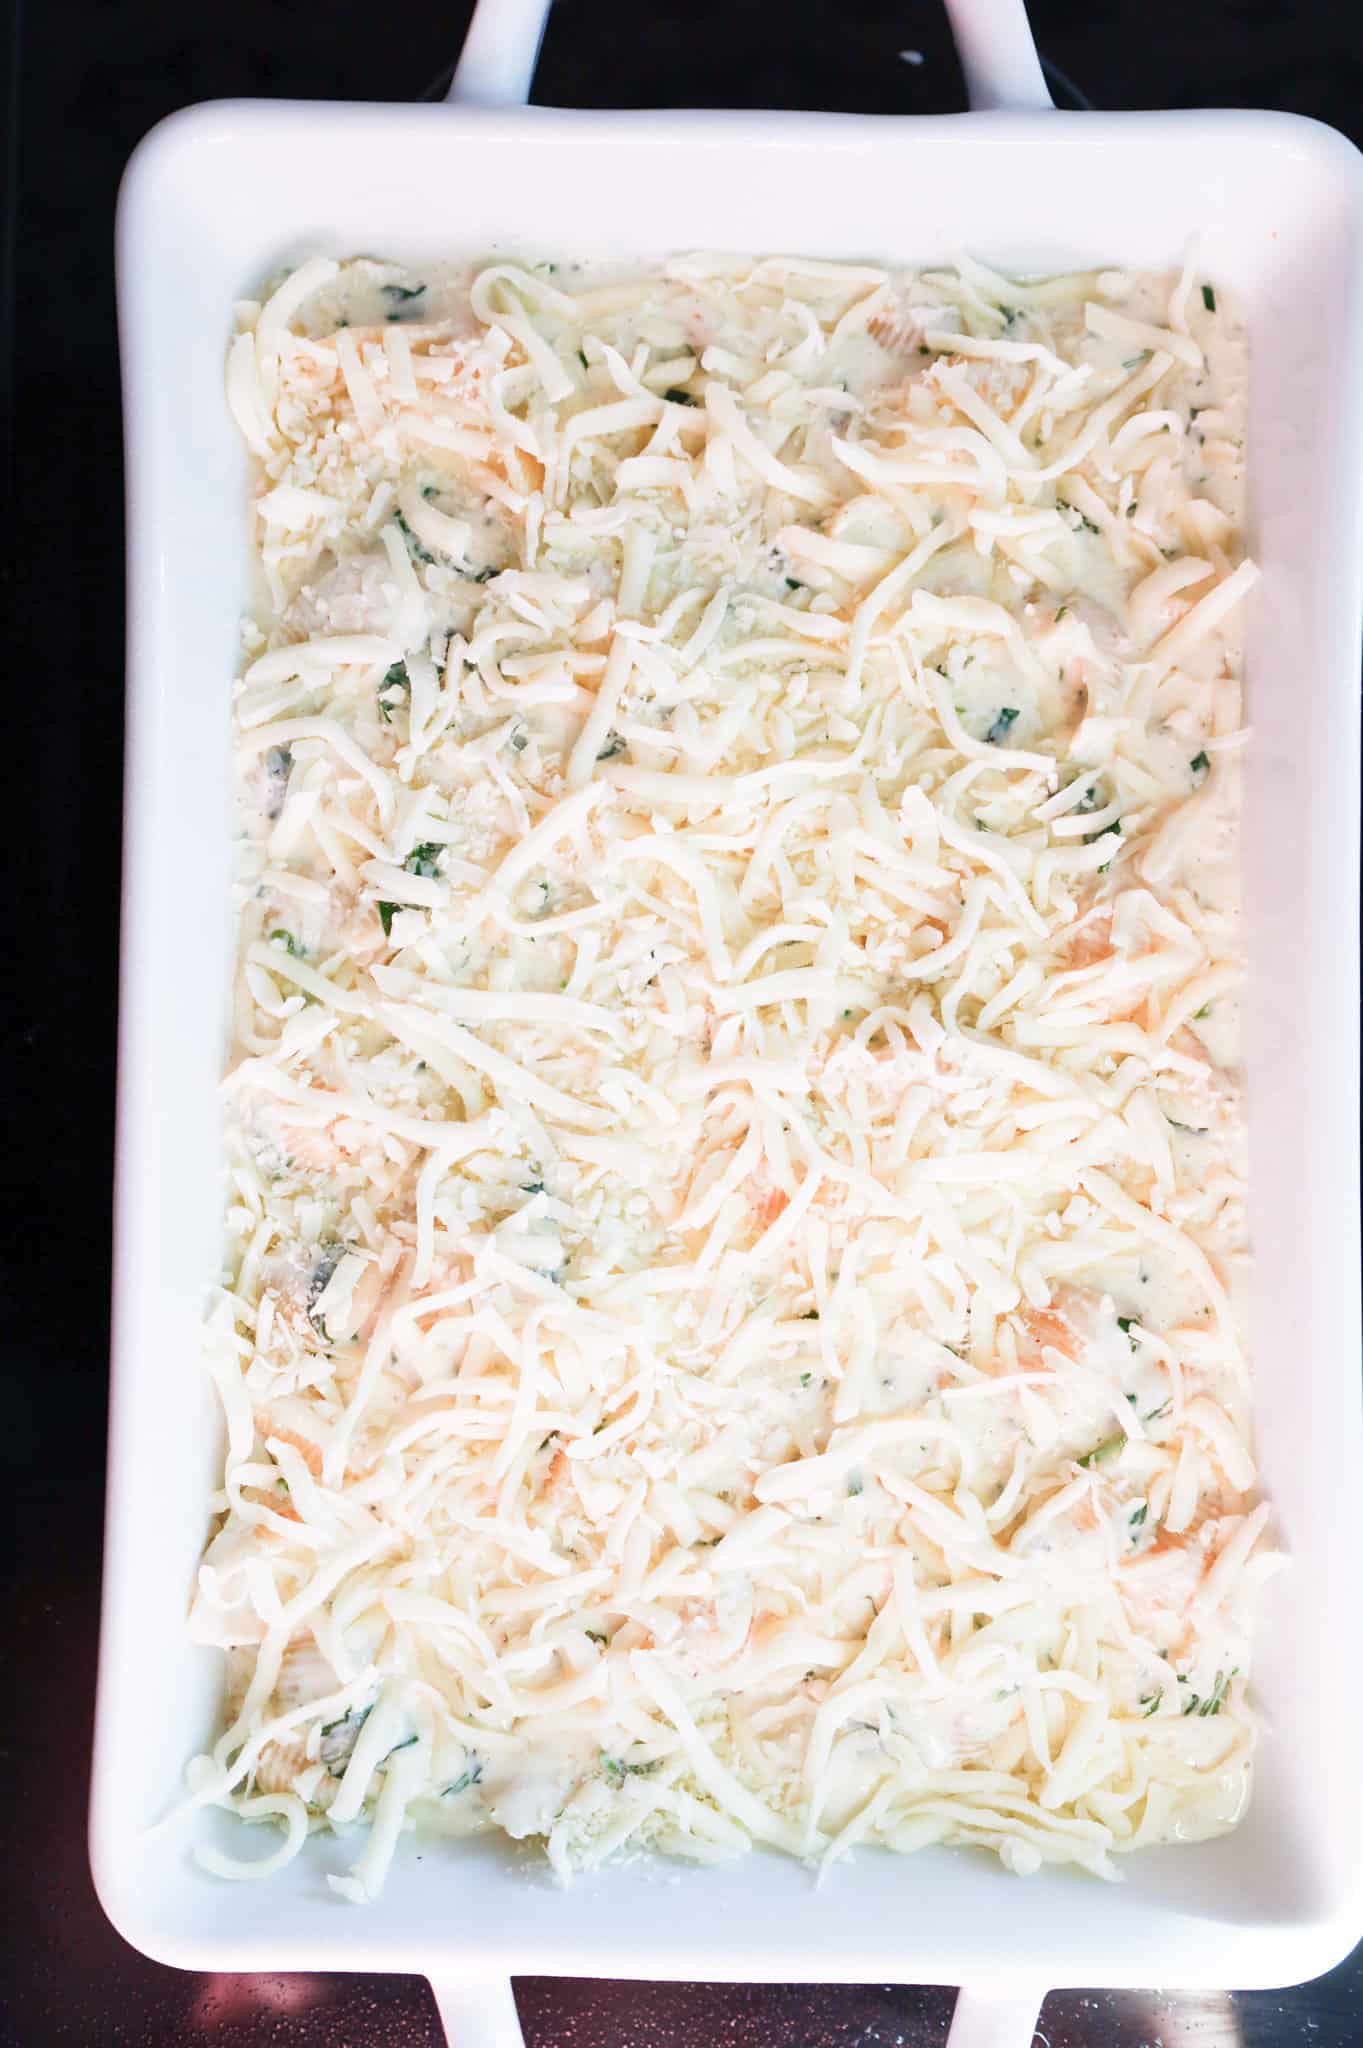 shredded mozzarella cheese on top of creamy pasta in a baking dish